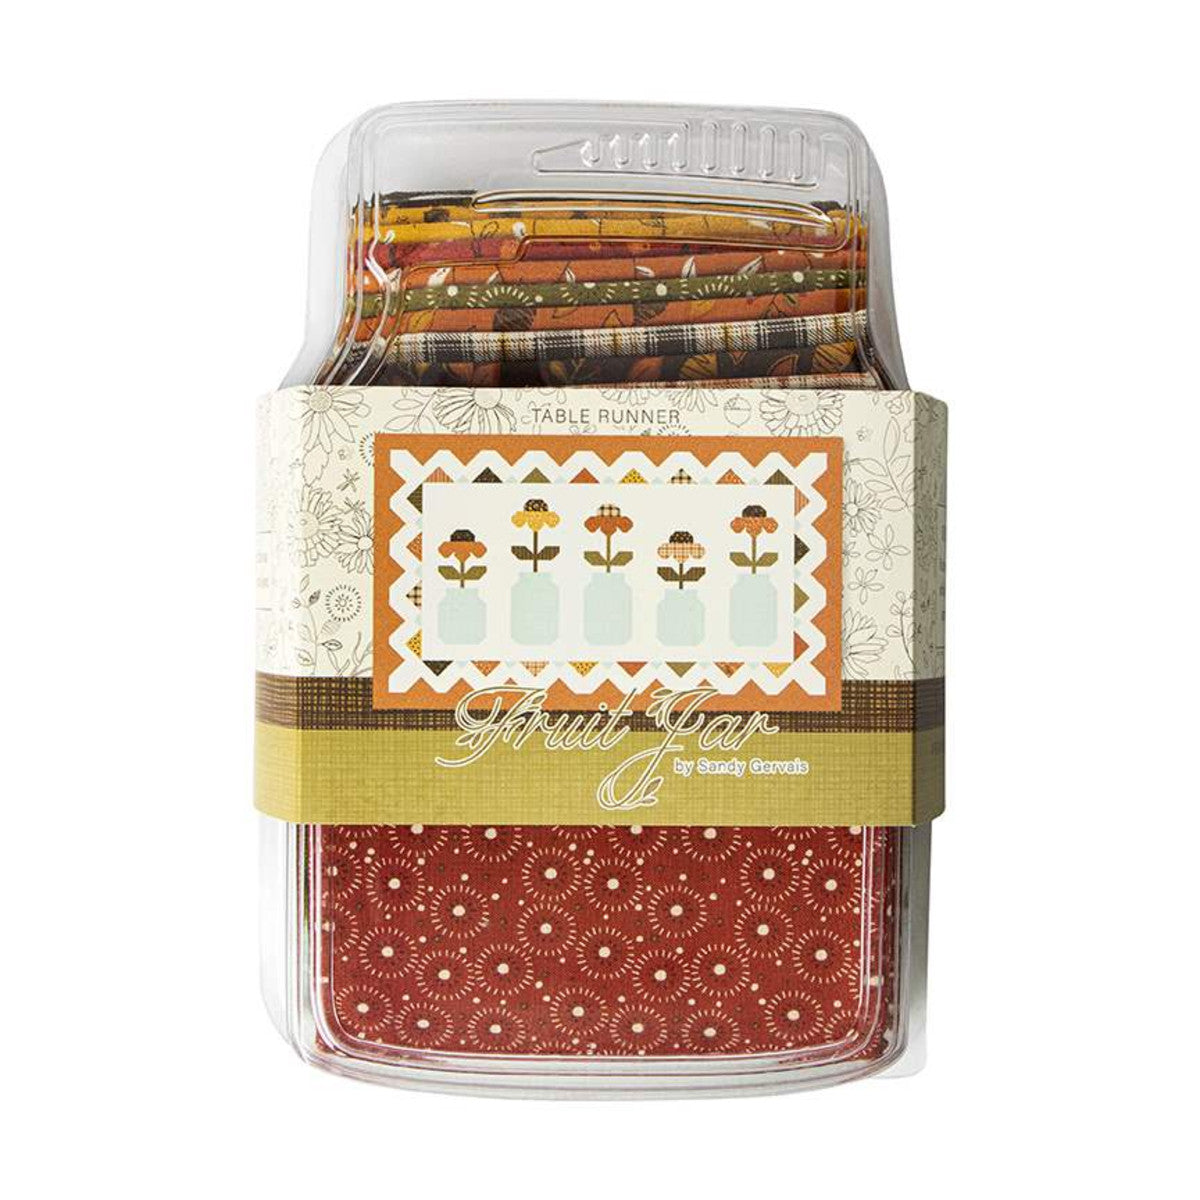 The Fruit Jar Autumn Runner Boxed Kit includes pattern and fabric for quilt top and binding. Backing not included. Fabric featured is Adel in Autumn by Sandy Gervais. Pattern is also by Sandy Gervais of Pieces from My Heart. Finished size is 32" x 56". Table runner kit comes in a reusable, plastic, jar-shaped box. Box size is approximately 6" x 10 3/4" x 2 1/2".